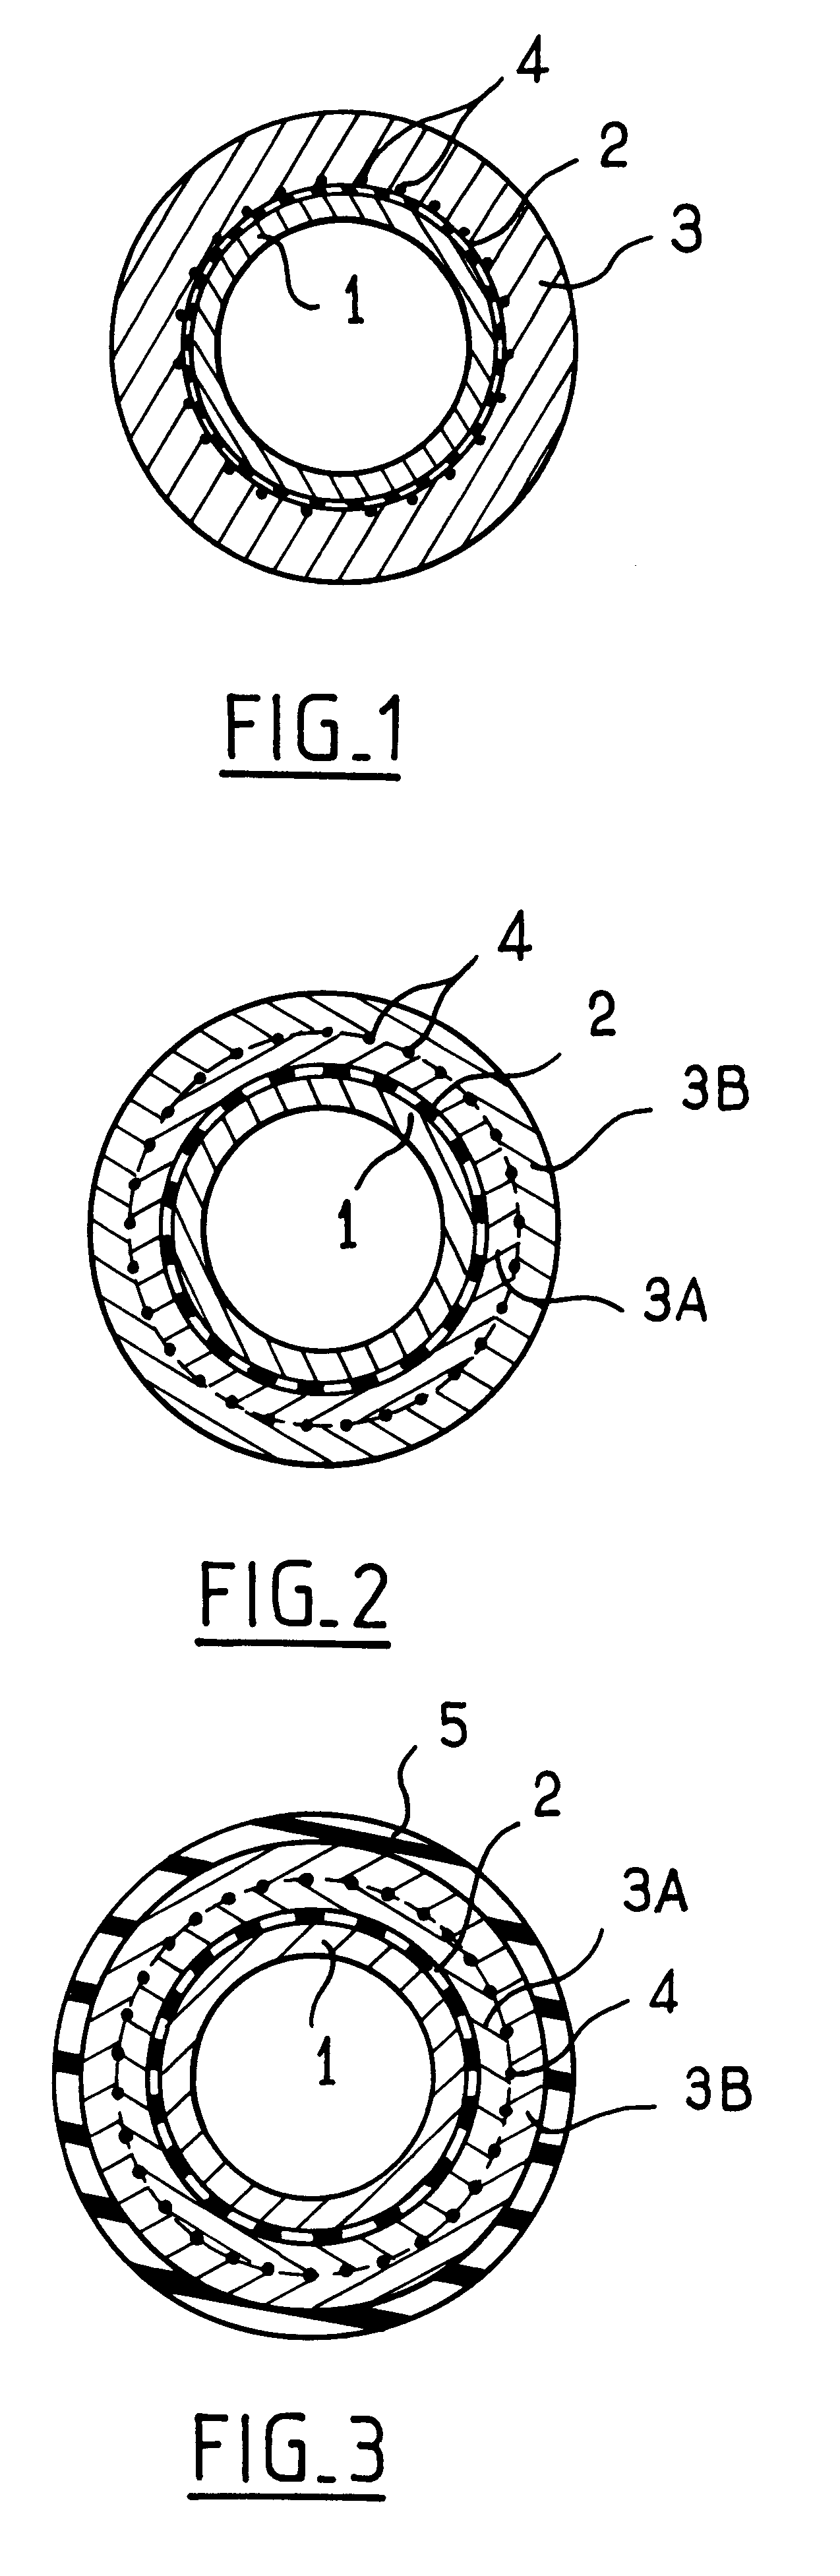 Multilayer hose for transporting chemicals having a high solvent content